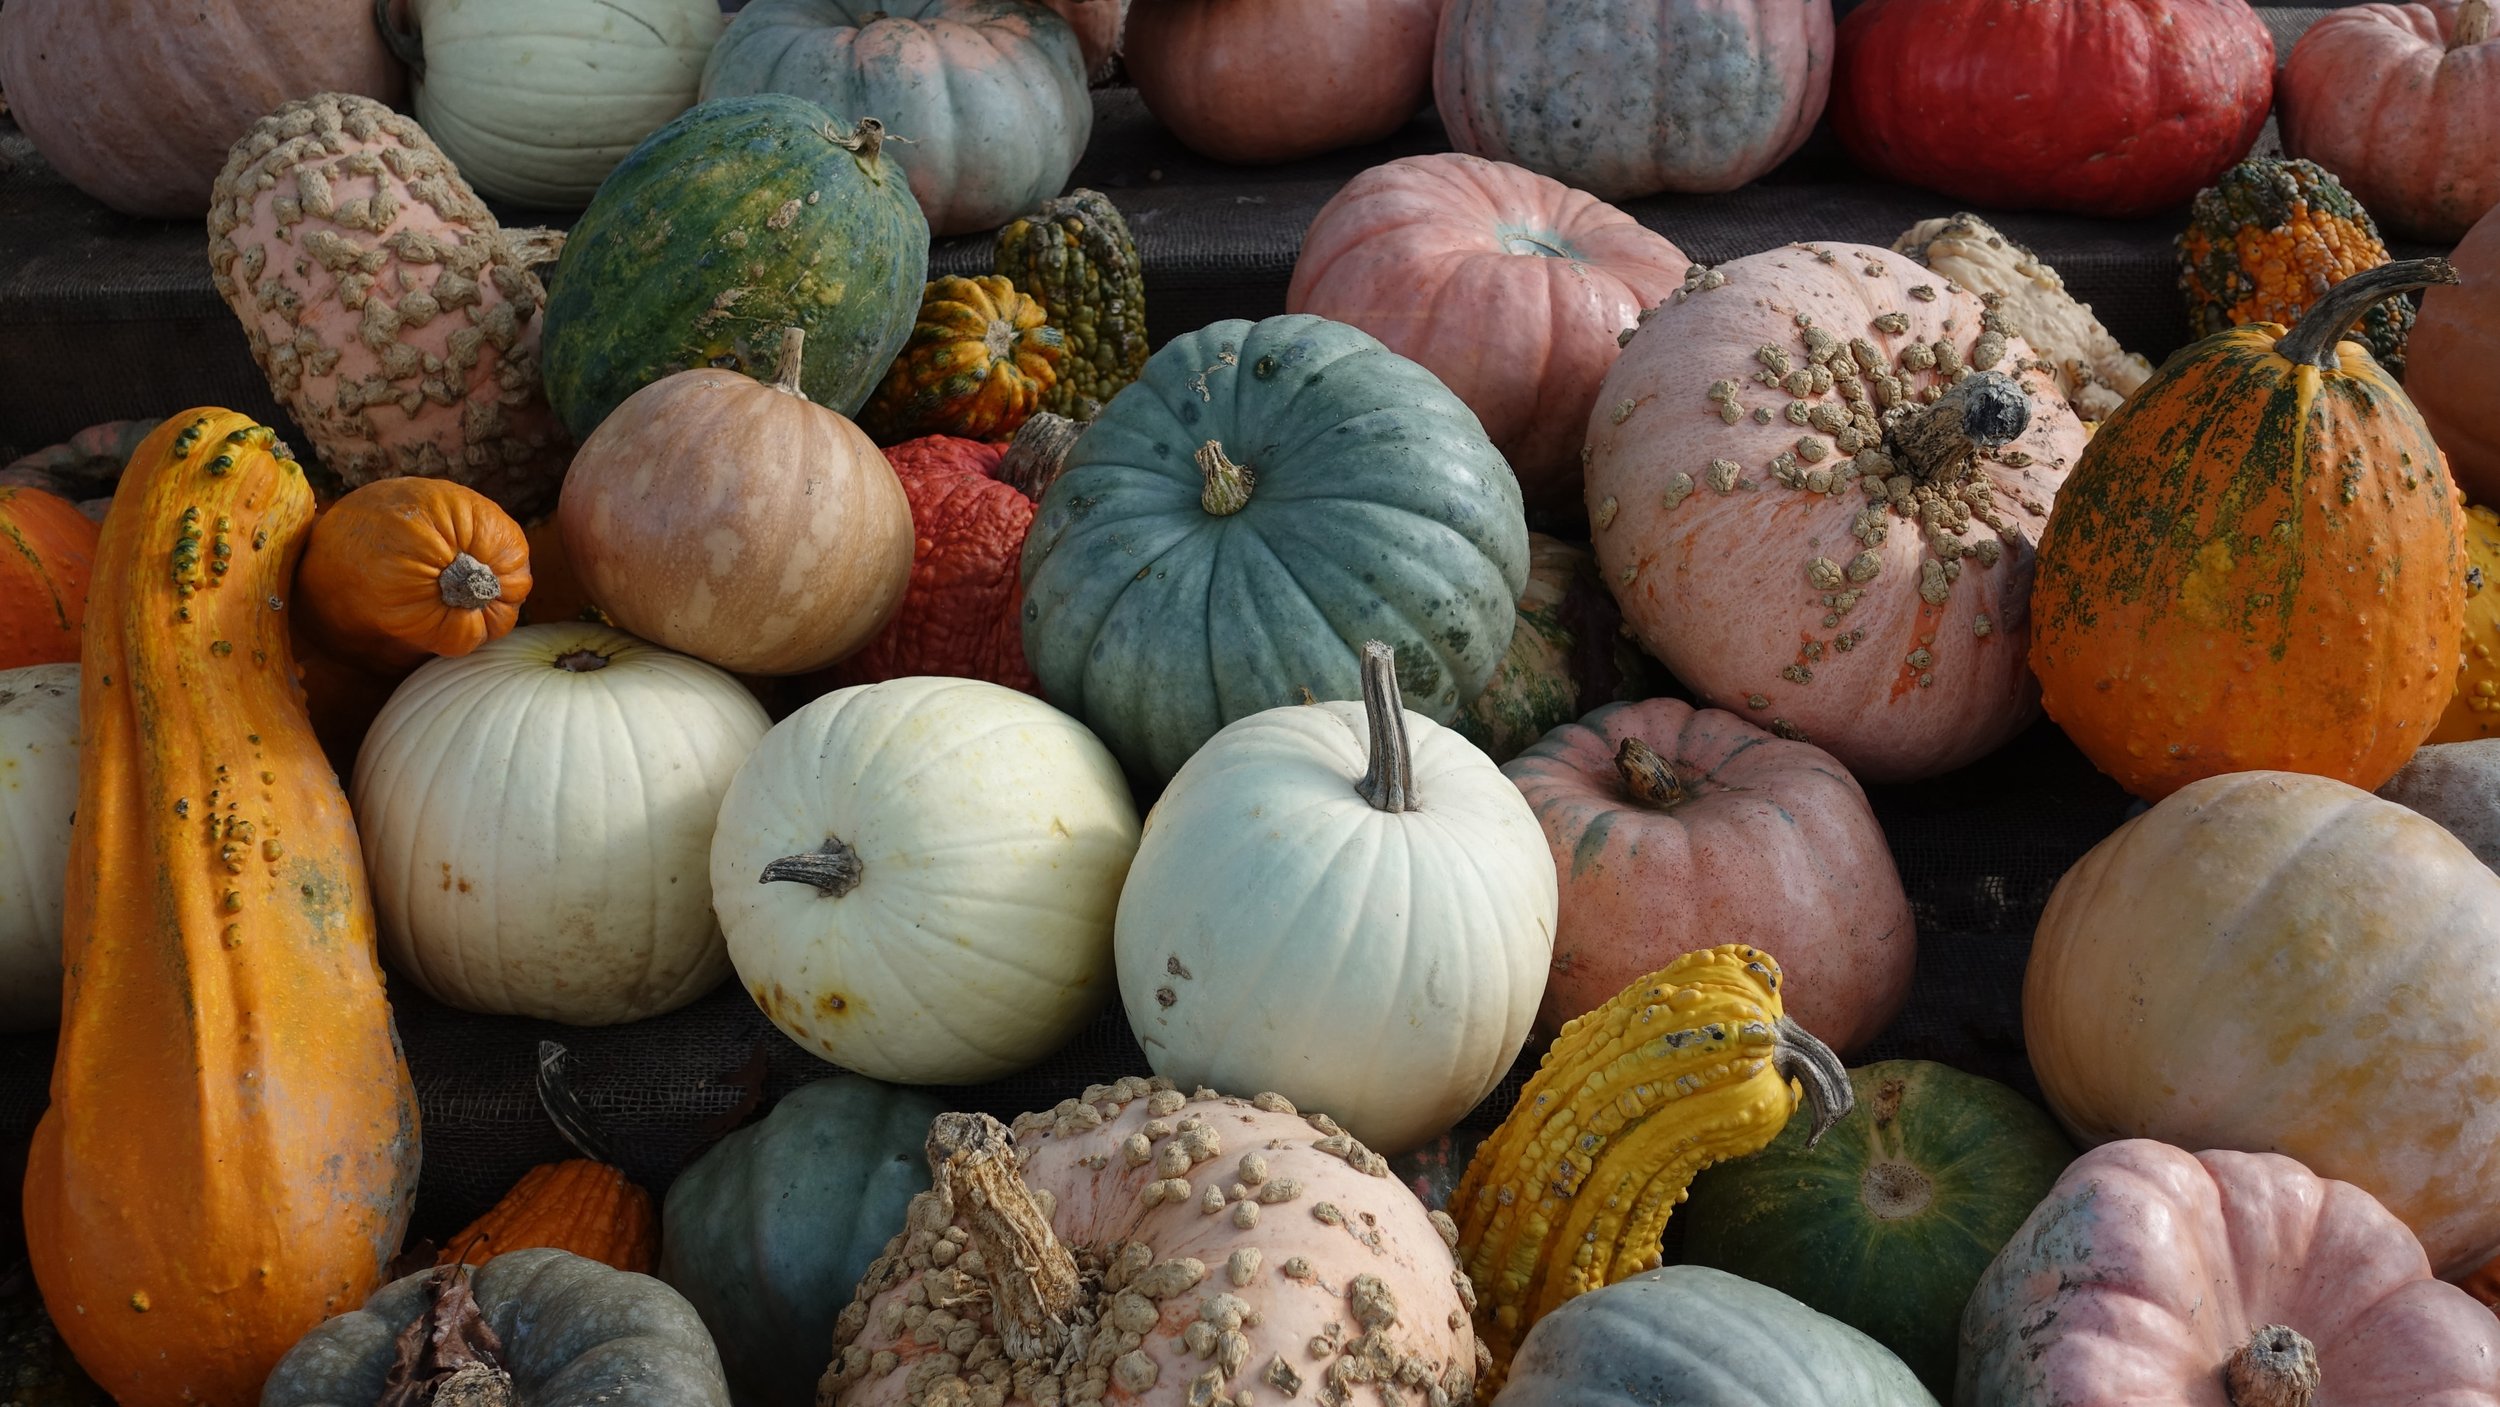 Sell tickets for more with these money-making pumpkin patch ideas